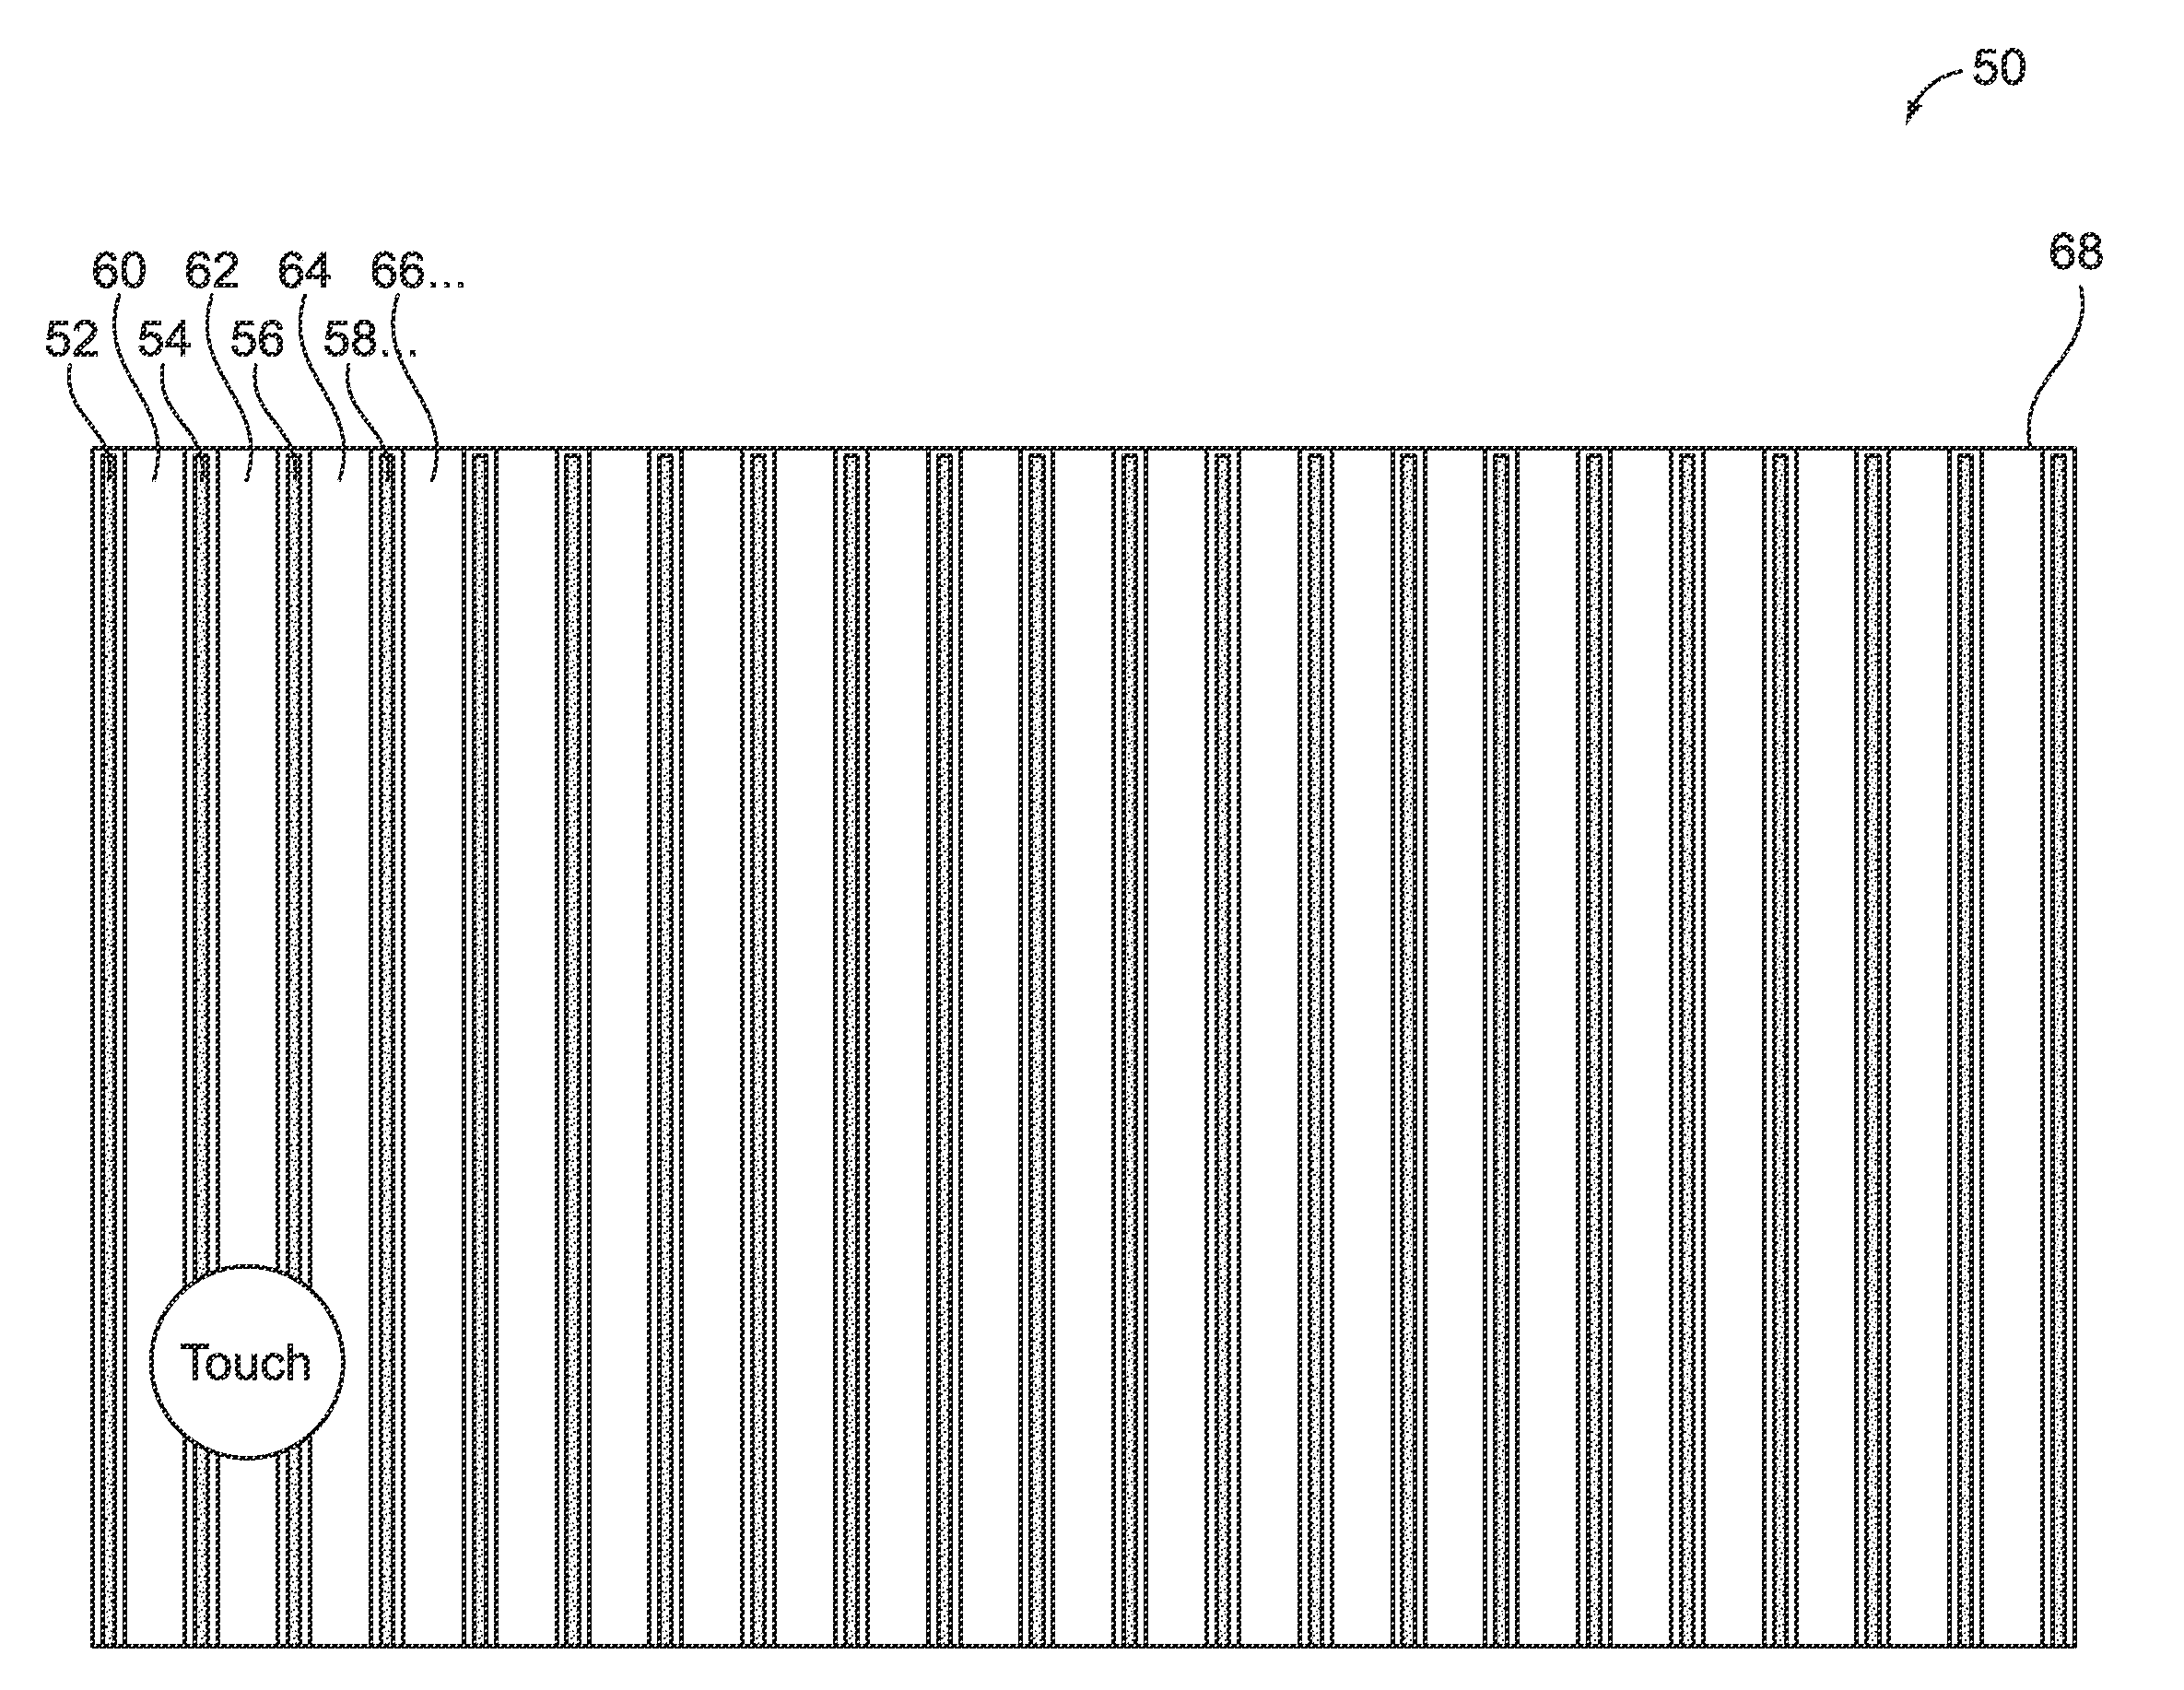 System and method for detecting locations of touches on a projected capacitive touch sensor